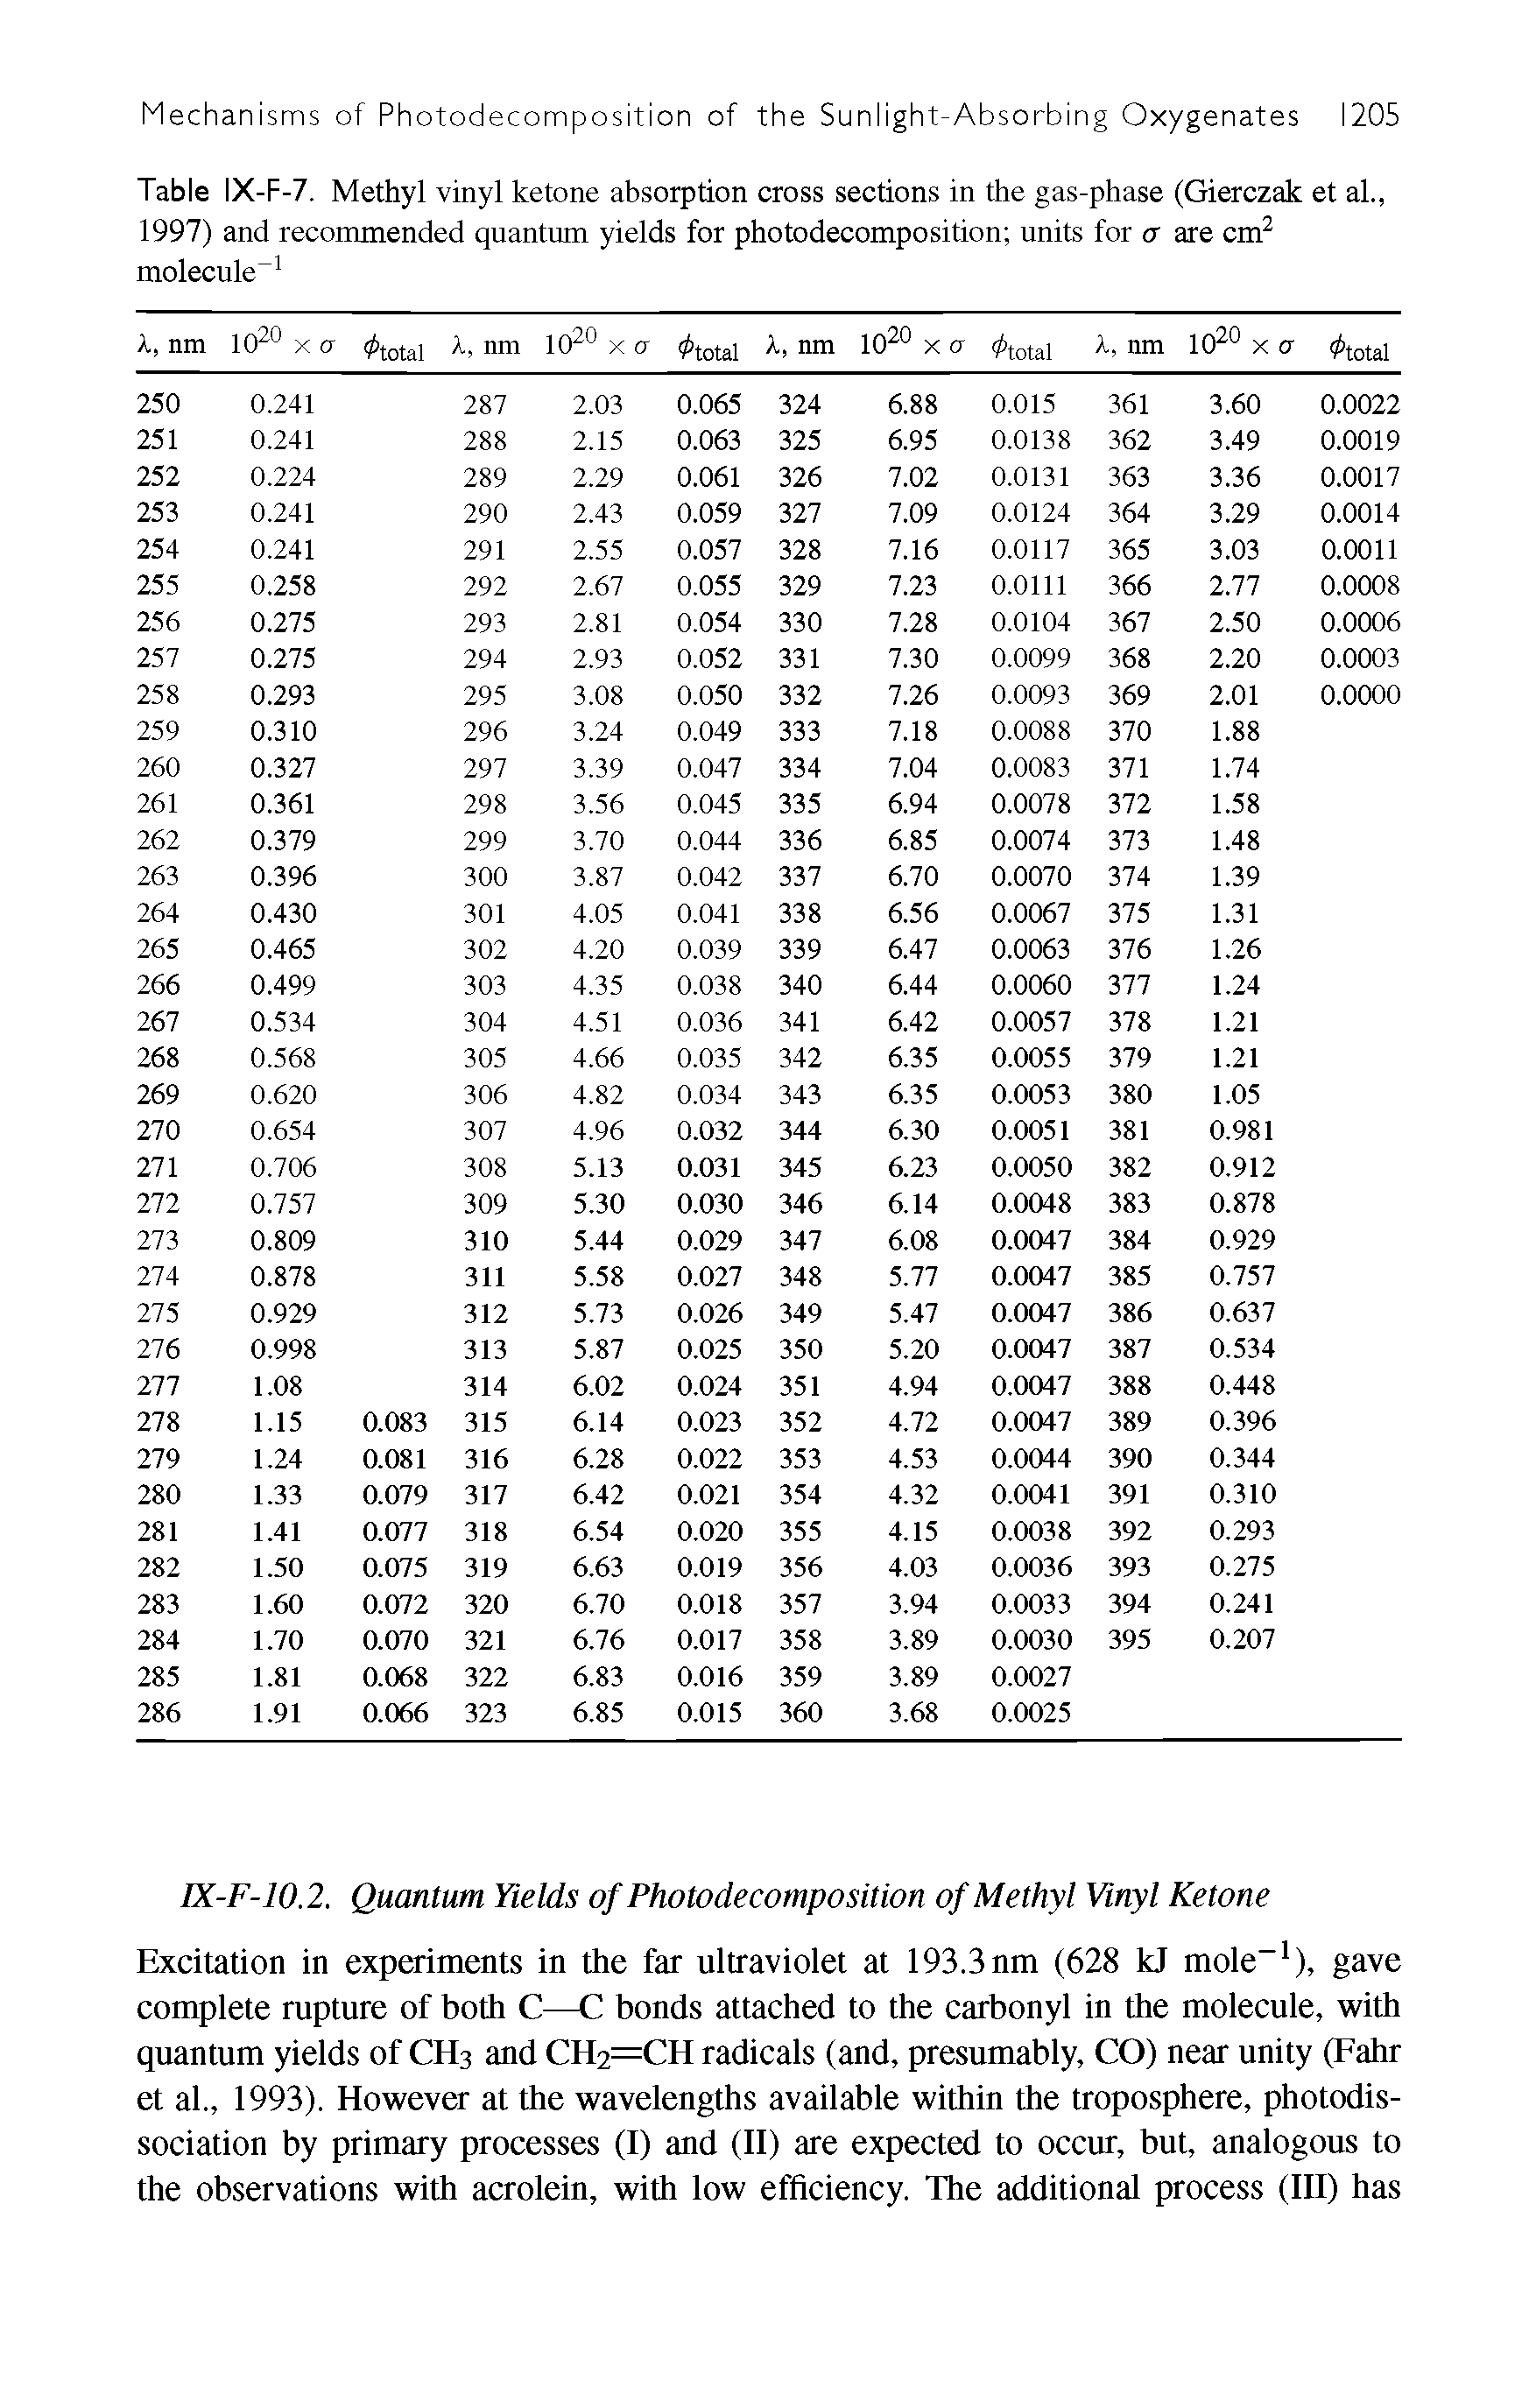 Table IX-F-7. Methyl vinyl ketone absorption cross sections in the gas-phase (Gierczak et al, 1997) and recommended quantum yields for photodecomposition units for cr are cm molecule ...